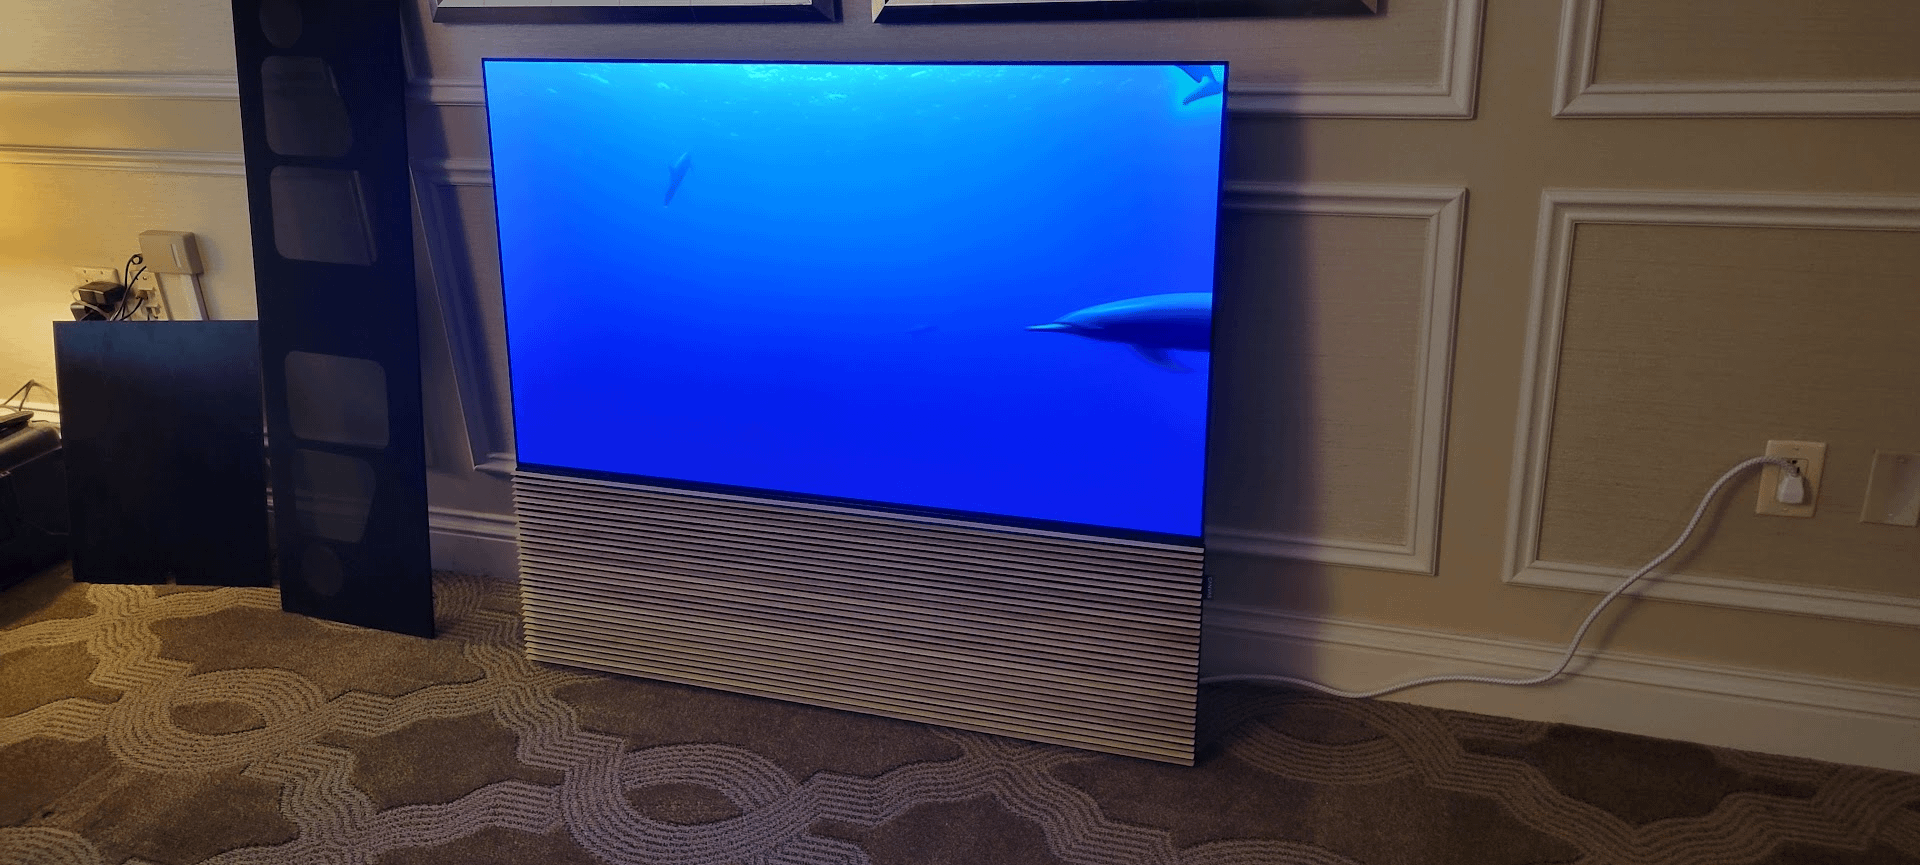 Canvas HiFi speakers can attach seamlessly to almost any 55, 65, 75 or 77-inch TV